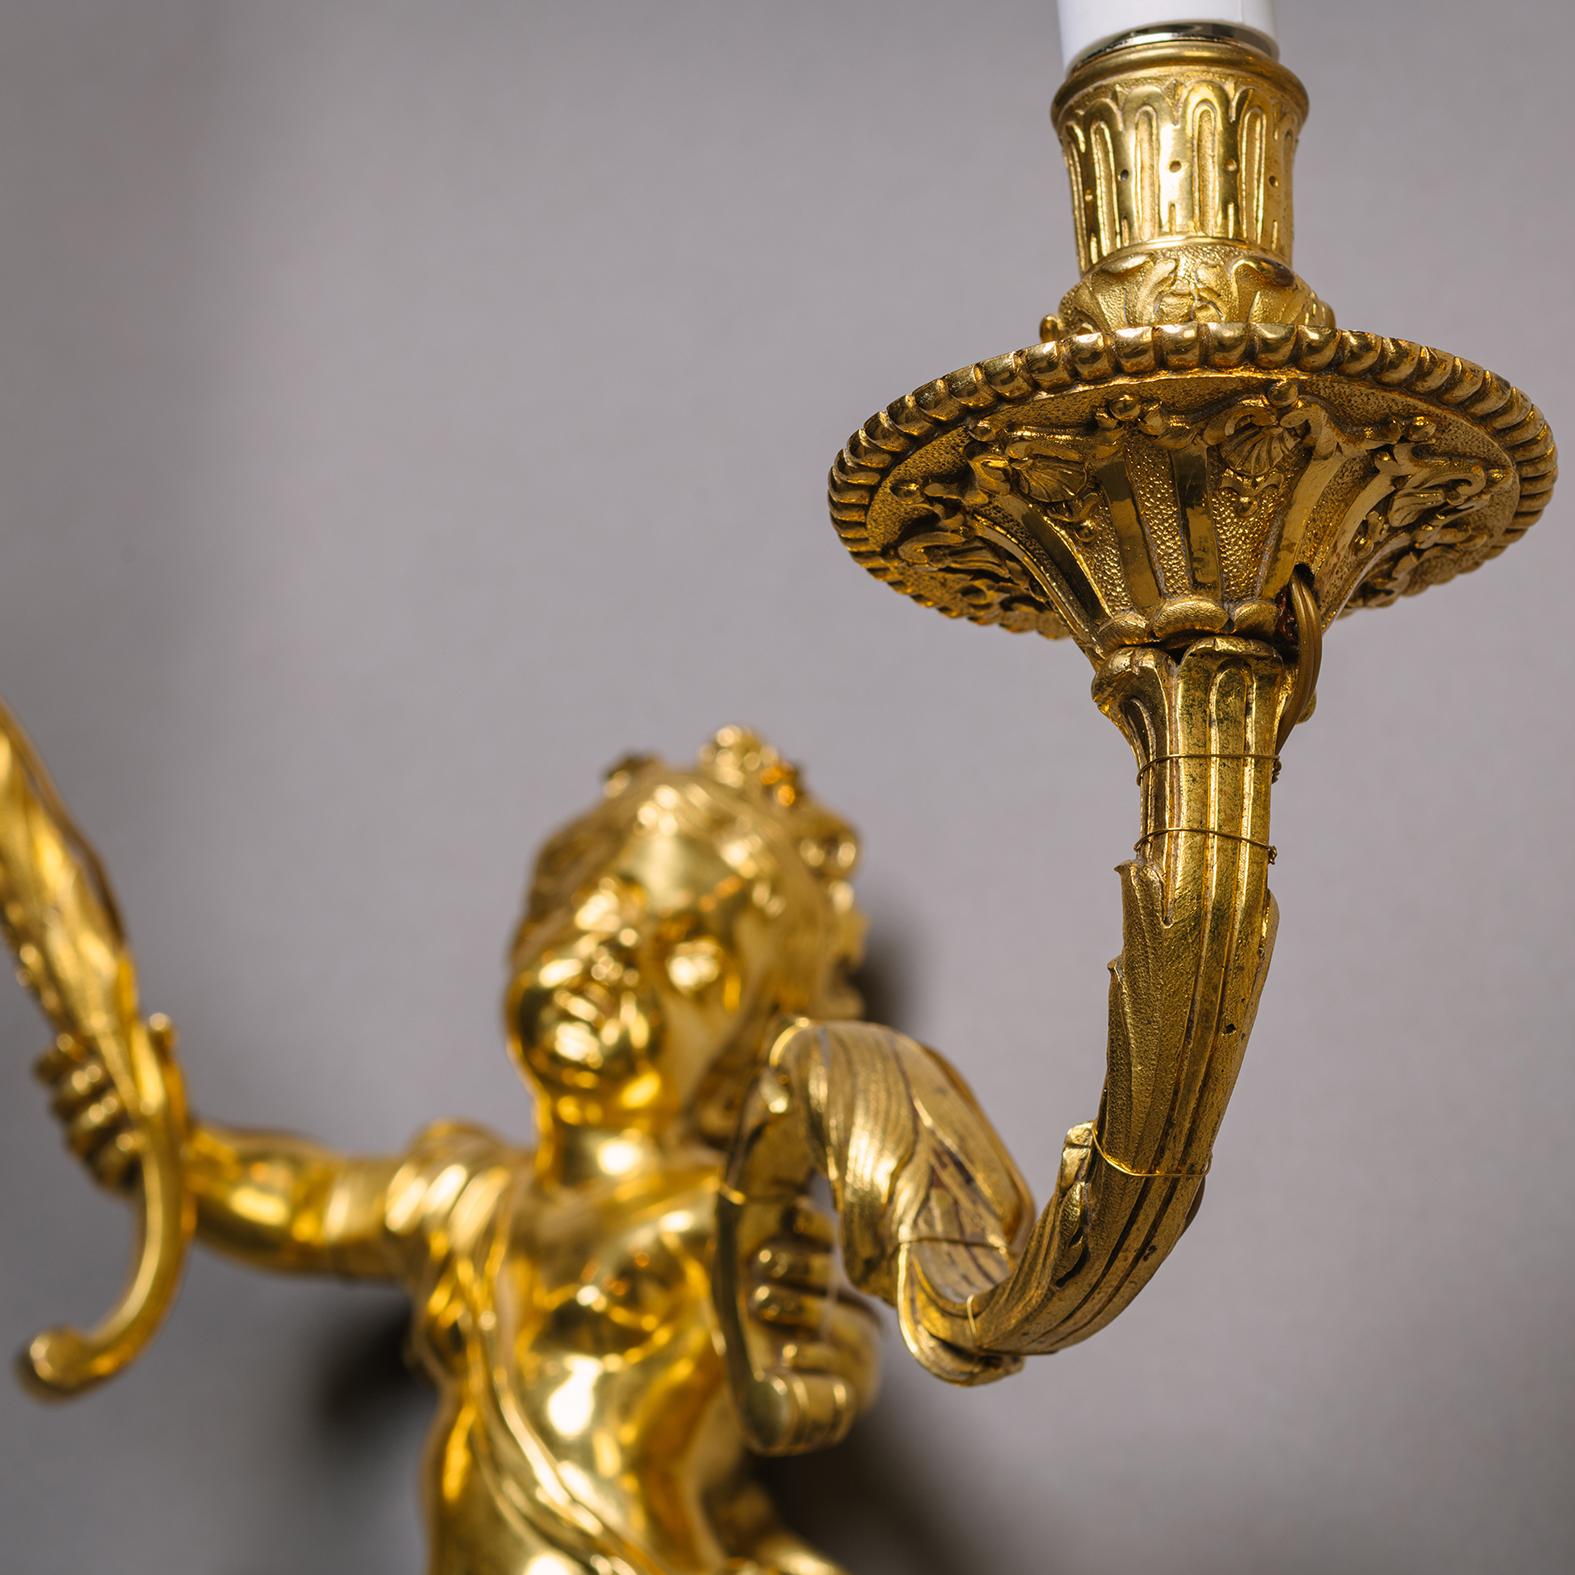 A Pair of Louis XIV Style Gilt-Bronze Twin-Light Wall-Appliques.

Each modelled as a cherubic herm emerging from bracket with foliate swags and holding an 'S'-shaped branch. Wired for electricity.

France, Circa 1870.

Conceived in the asymmetrical